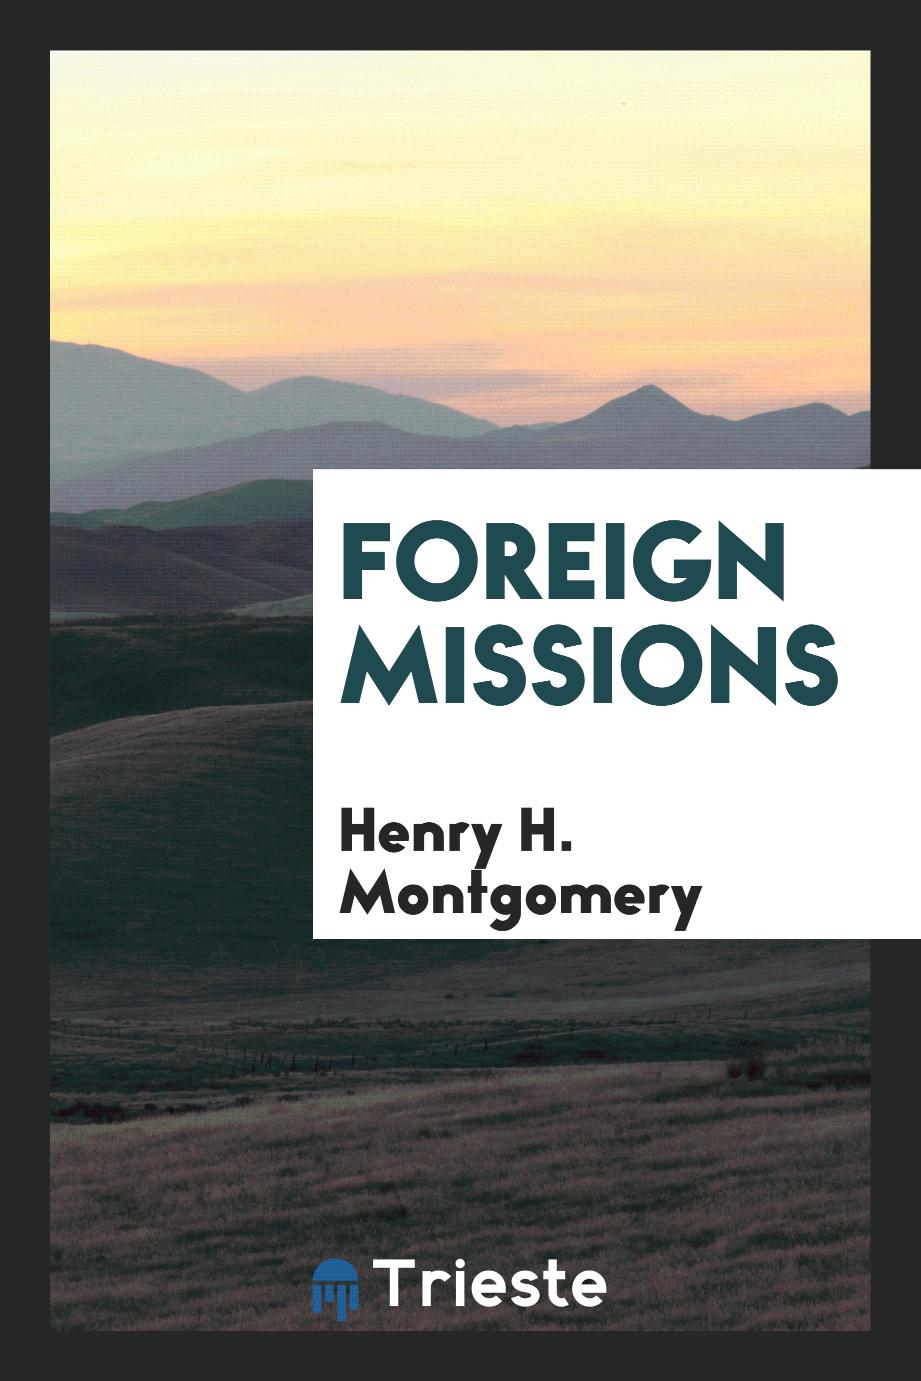 Foreign missions